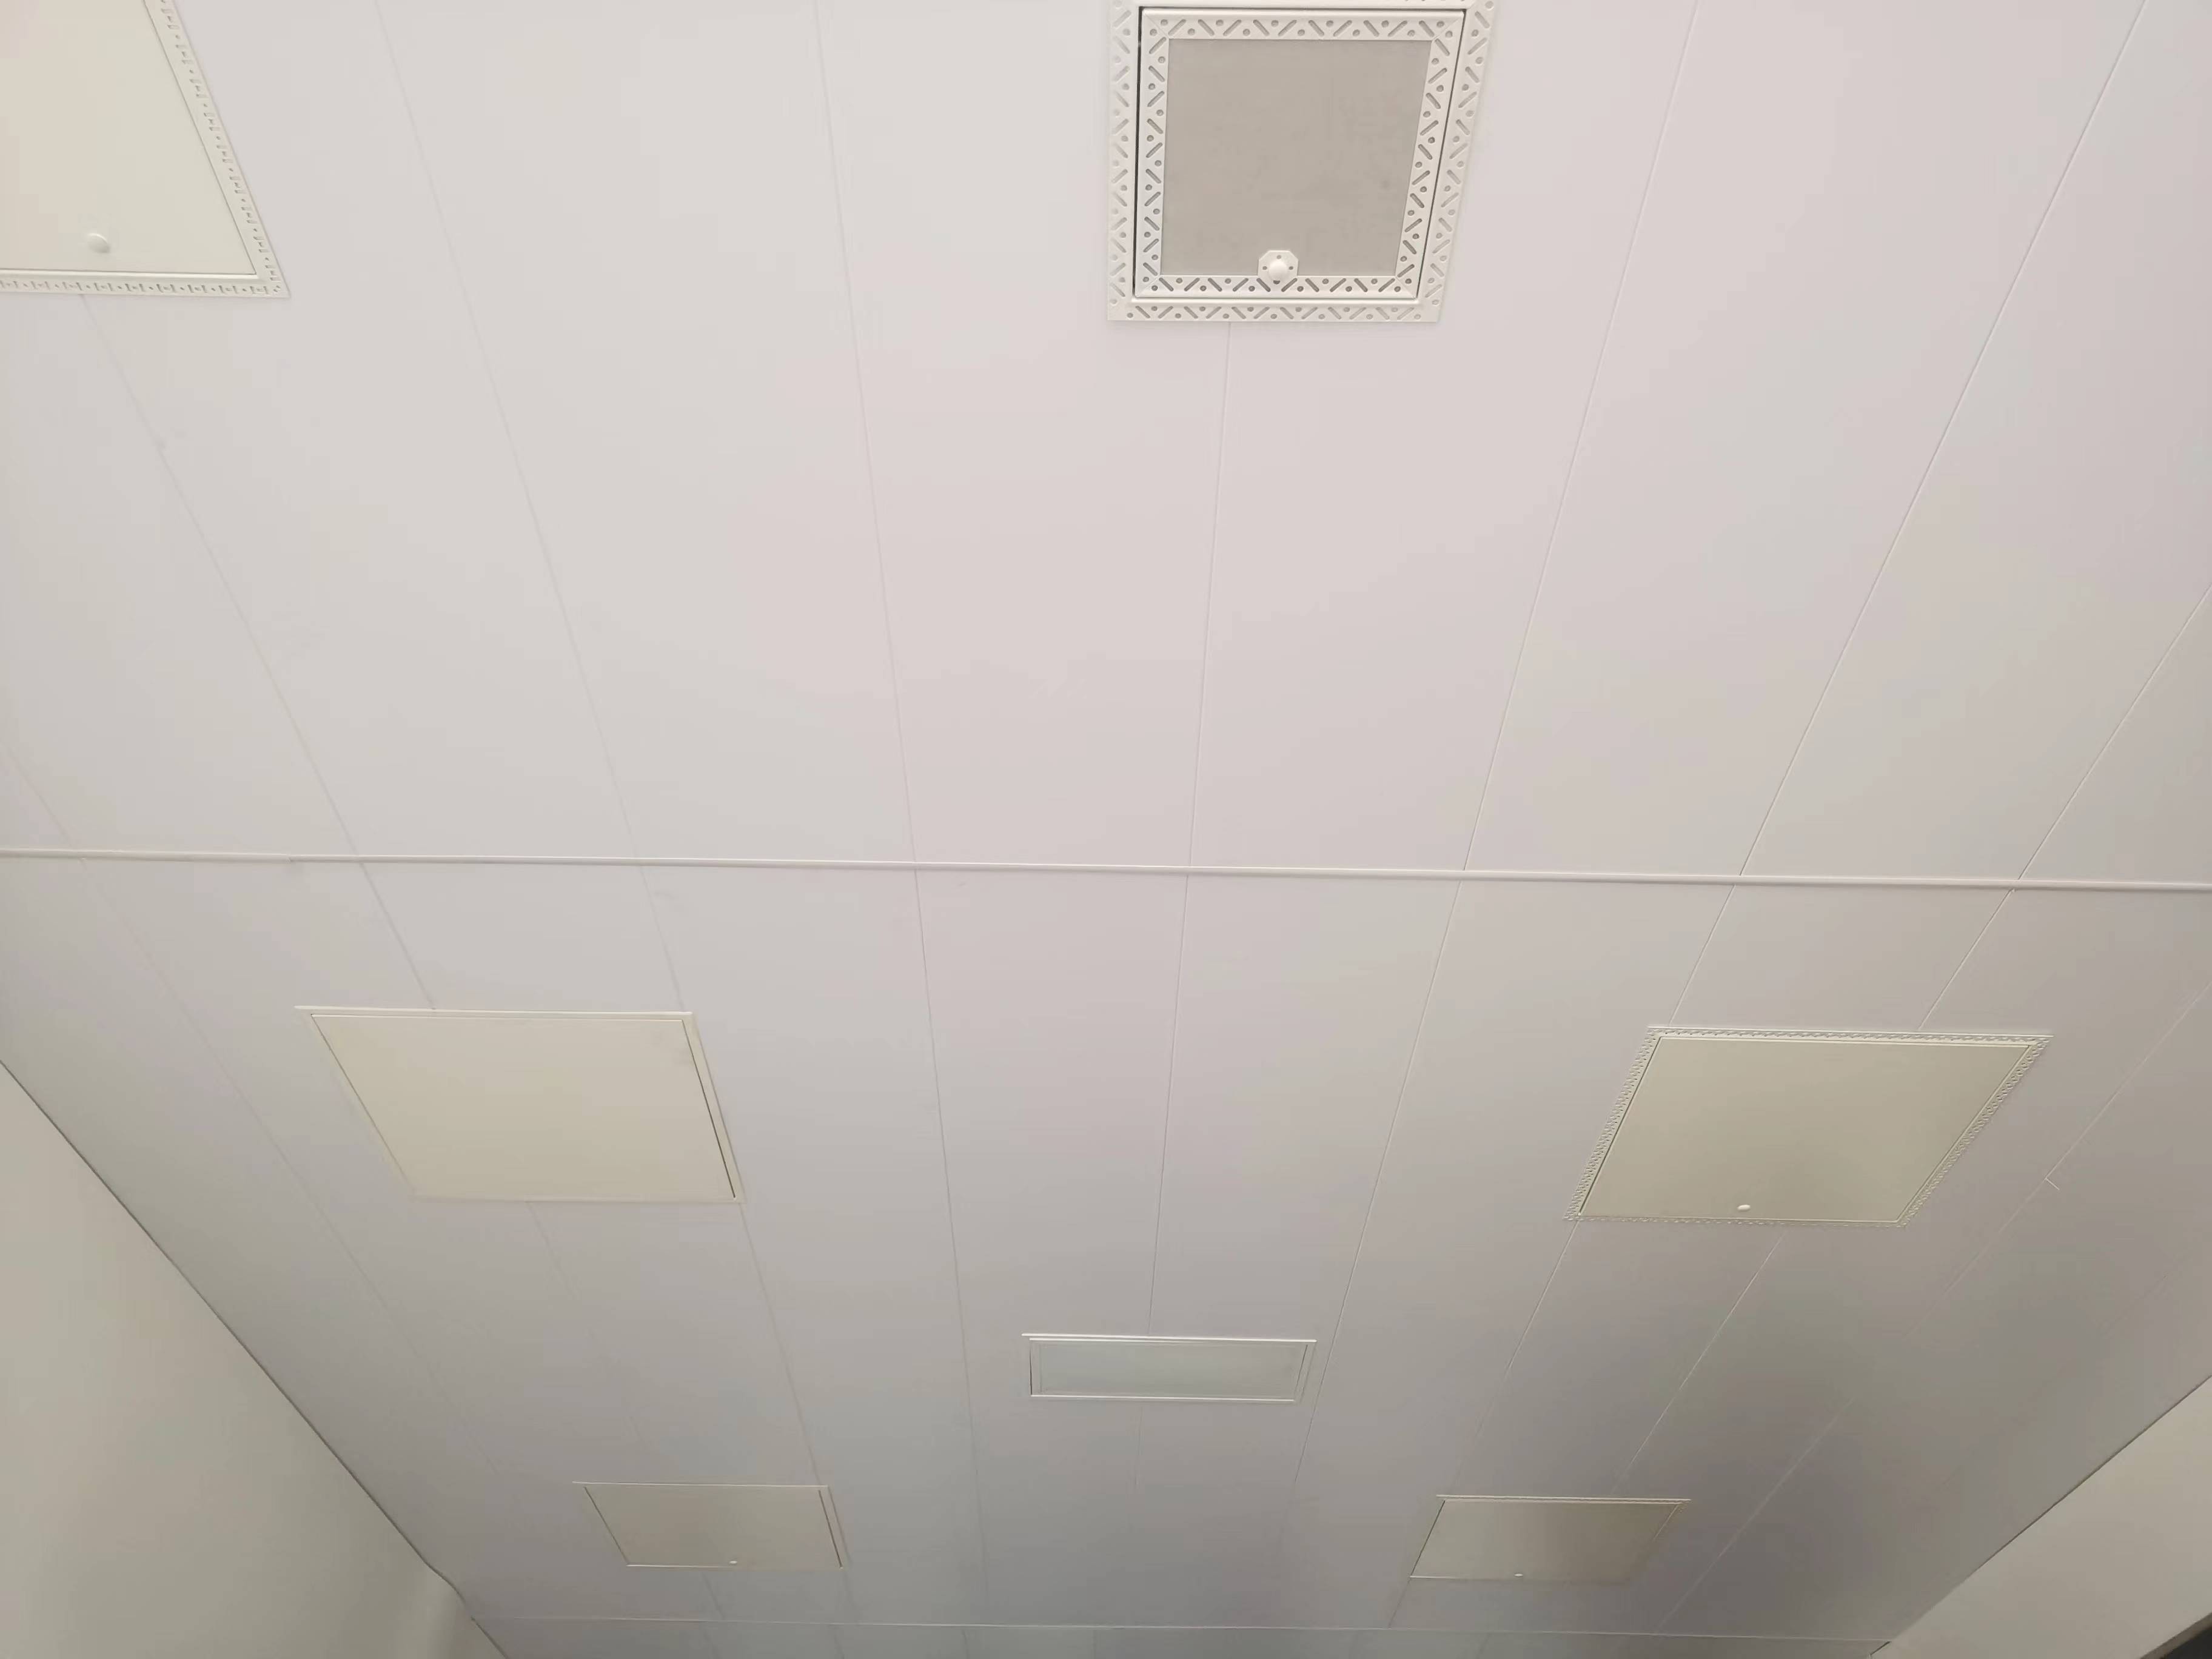 Ceiling access panel need to be fire rated or not ?